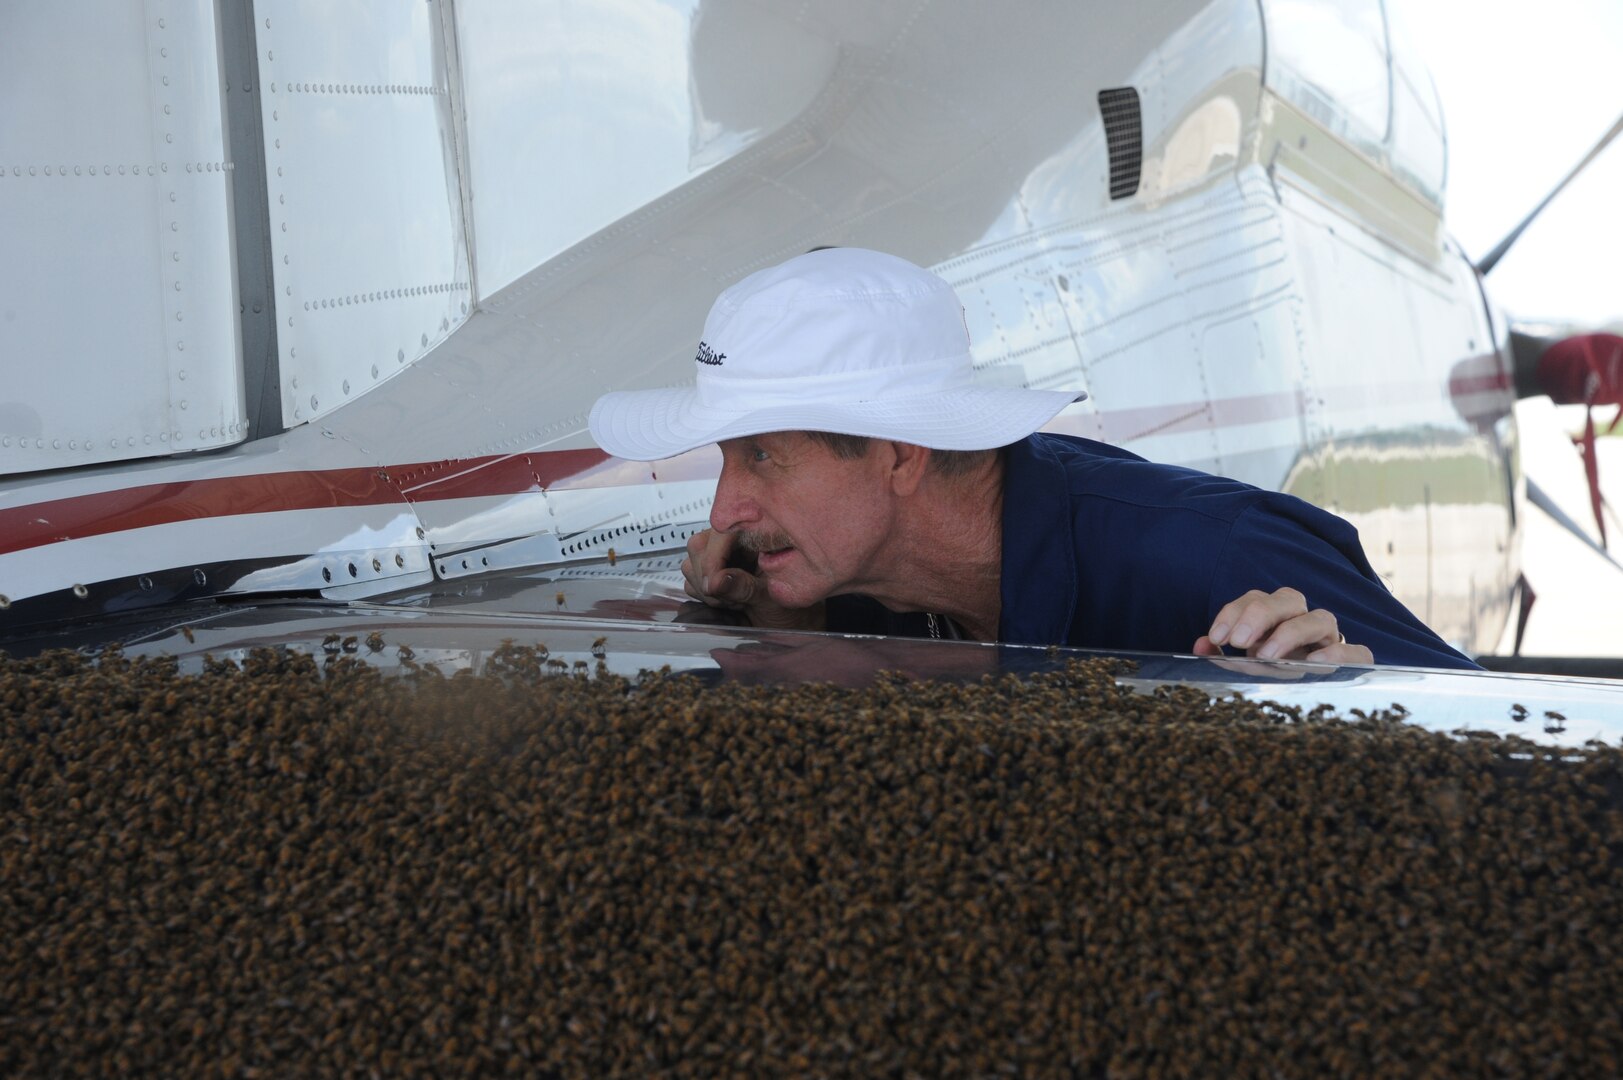 Steve Kelly, 902nd Civil Engineer Squadron entomology section, examines a swarm of bees on the flap of a T-6 Texan II aircraft on the flightline at Joint Base San Antonio-Randolph, Texas, June 13. (U.S. Air Force photo by Rich McFadden) 